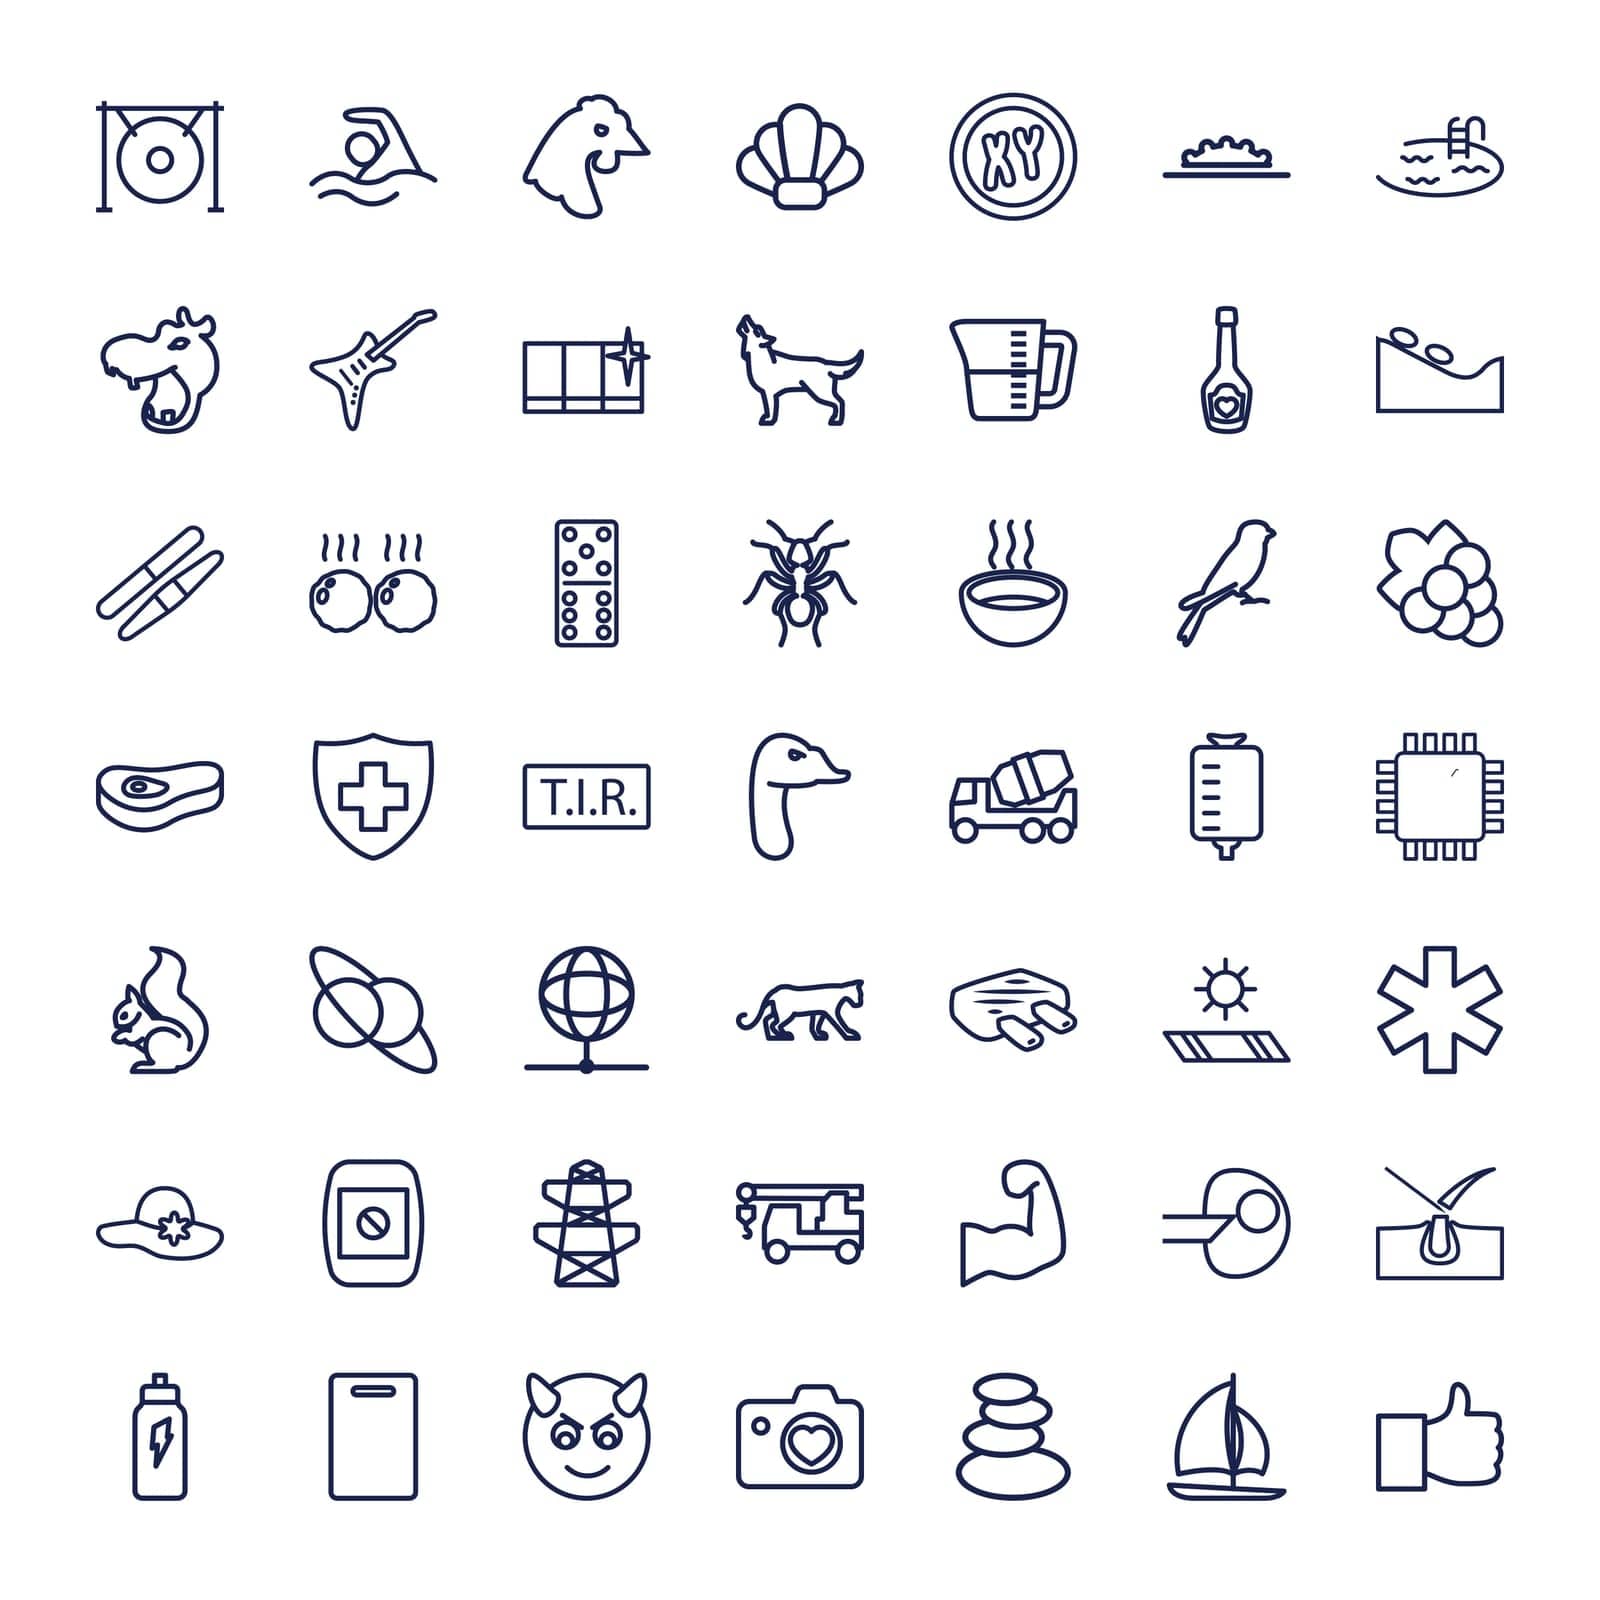 muscular,pylon,sailboat,medical,woman,truck,icon,skin,devil,sun,hair,hook,and,logo,hat,vector,satellite,camera,arm,shave,energetic,emot,set,like,spa,in,planet,display,drink,heart,the,core,with,globe,carpet,meat,cutting,panther,stones,board